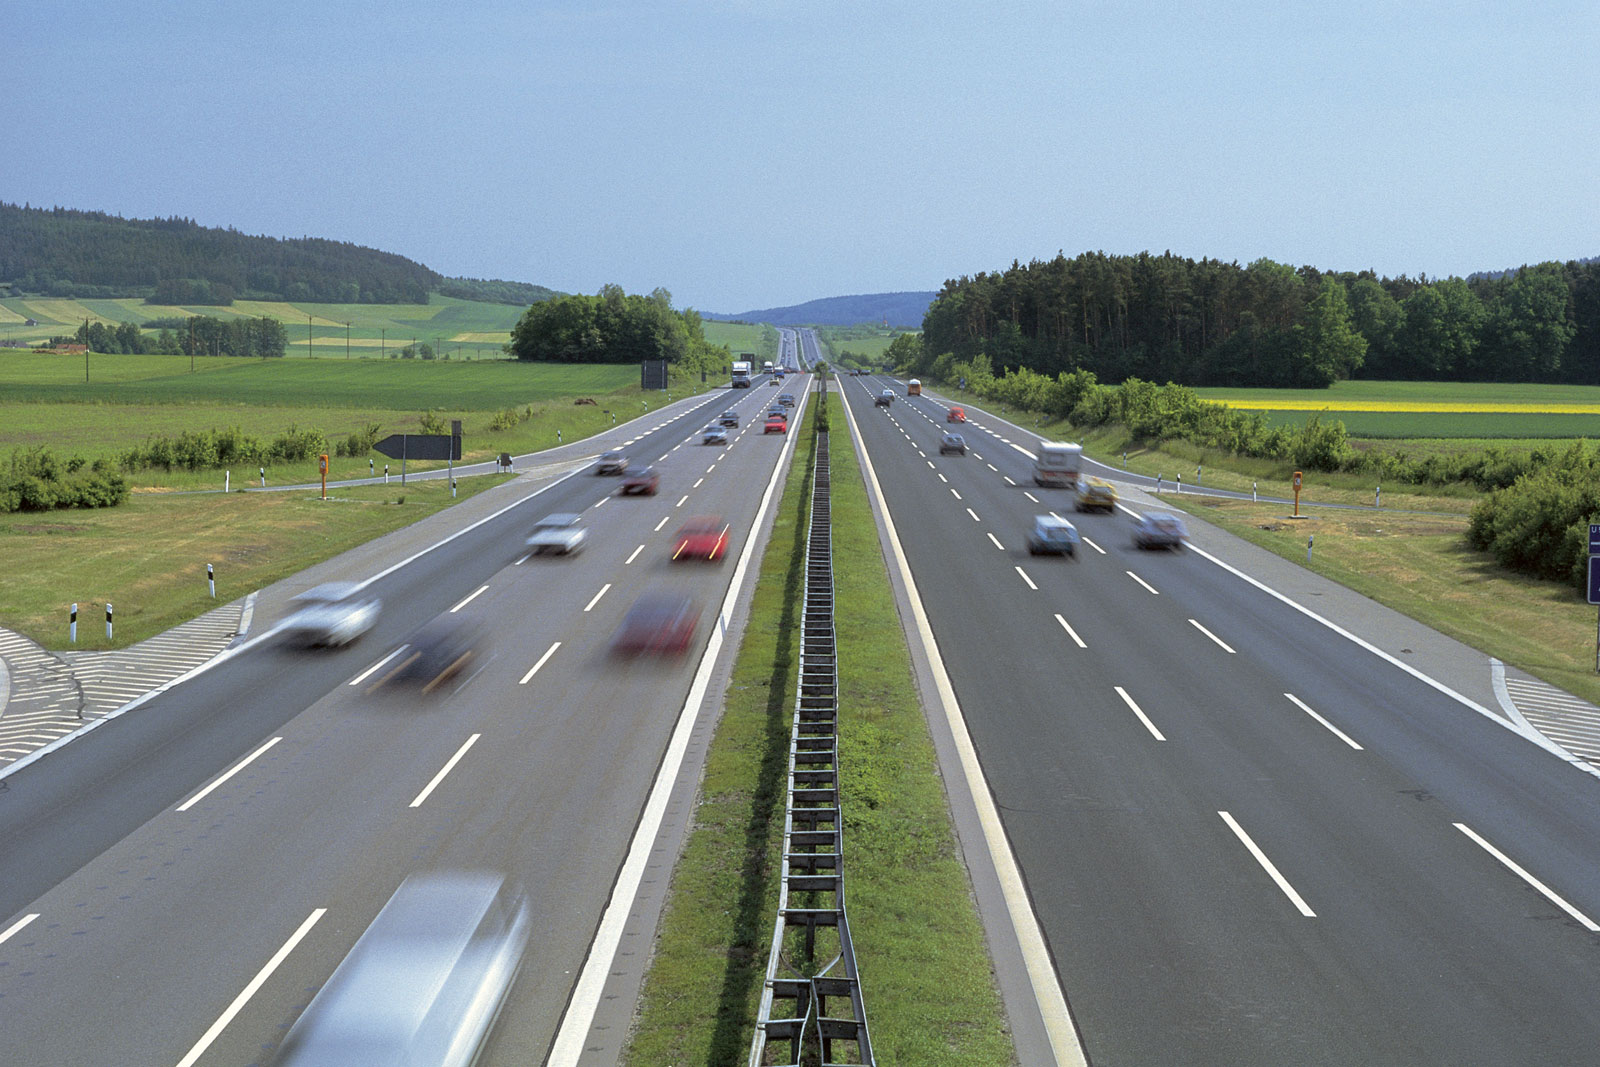 The Autobahn south of Nürnberg, Germany. Comstock Images/Jupiterimages